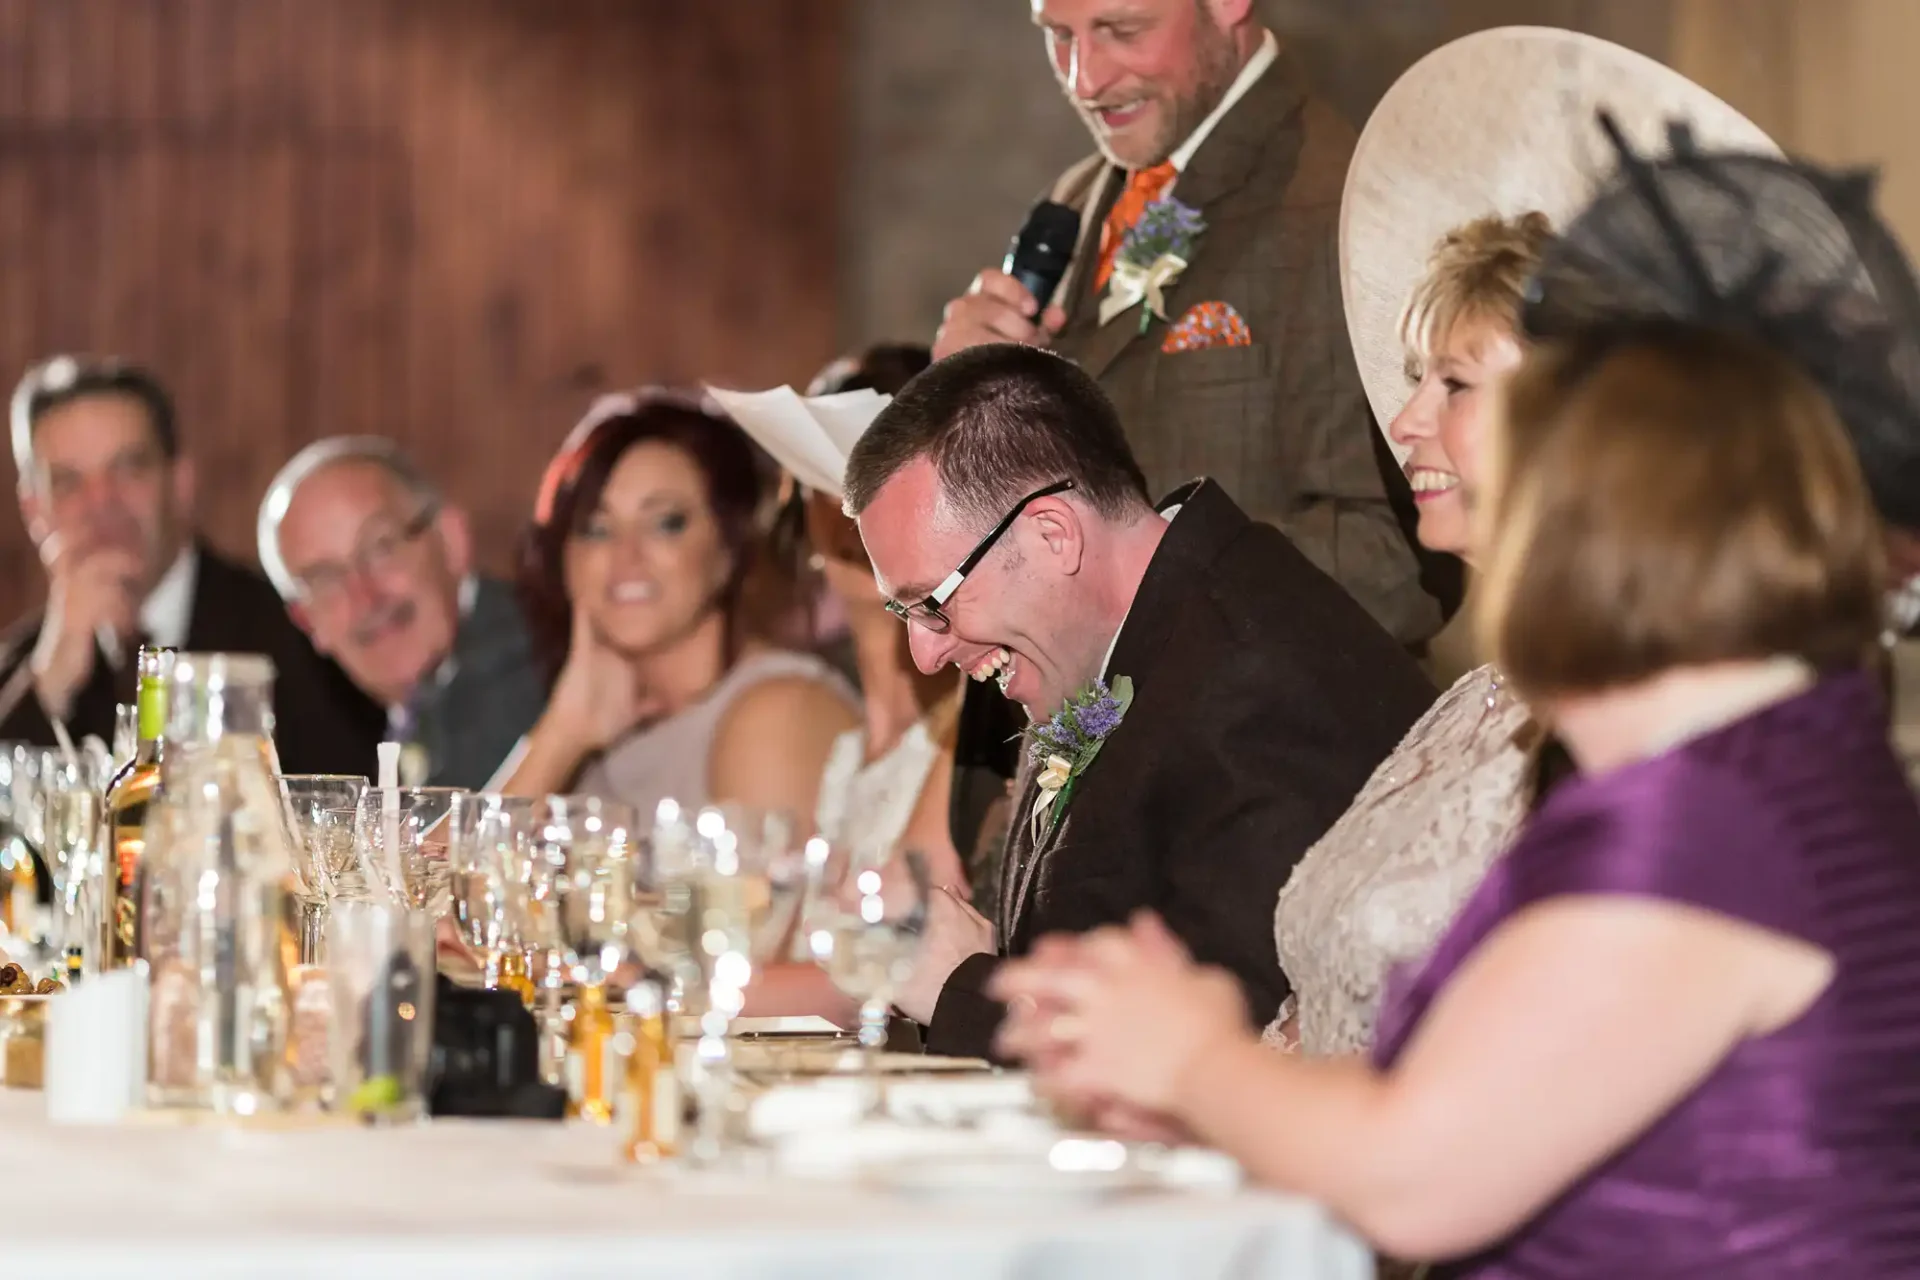 A man in a kippah laughs heartily at a wedding table while others, including a man with a microphone, enjoy the moment.